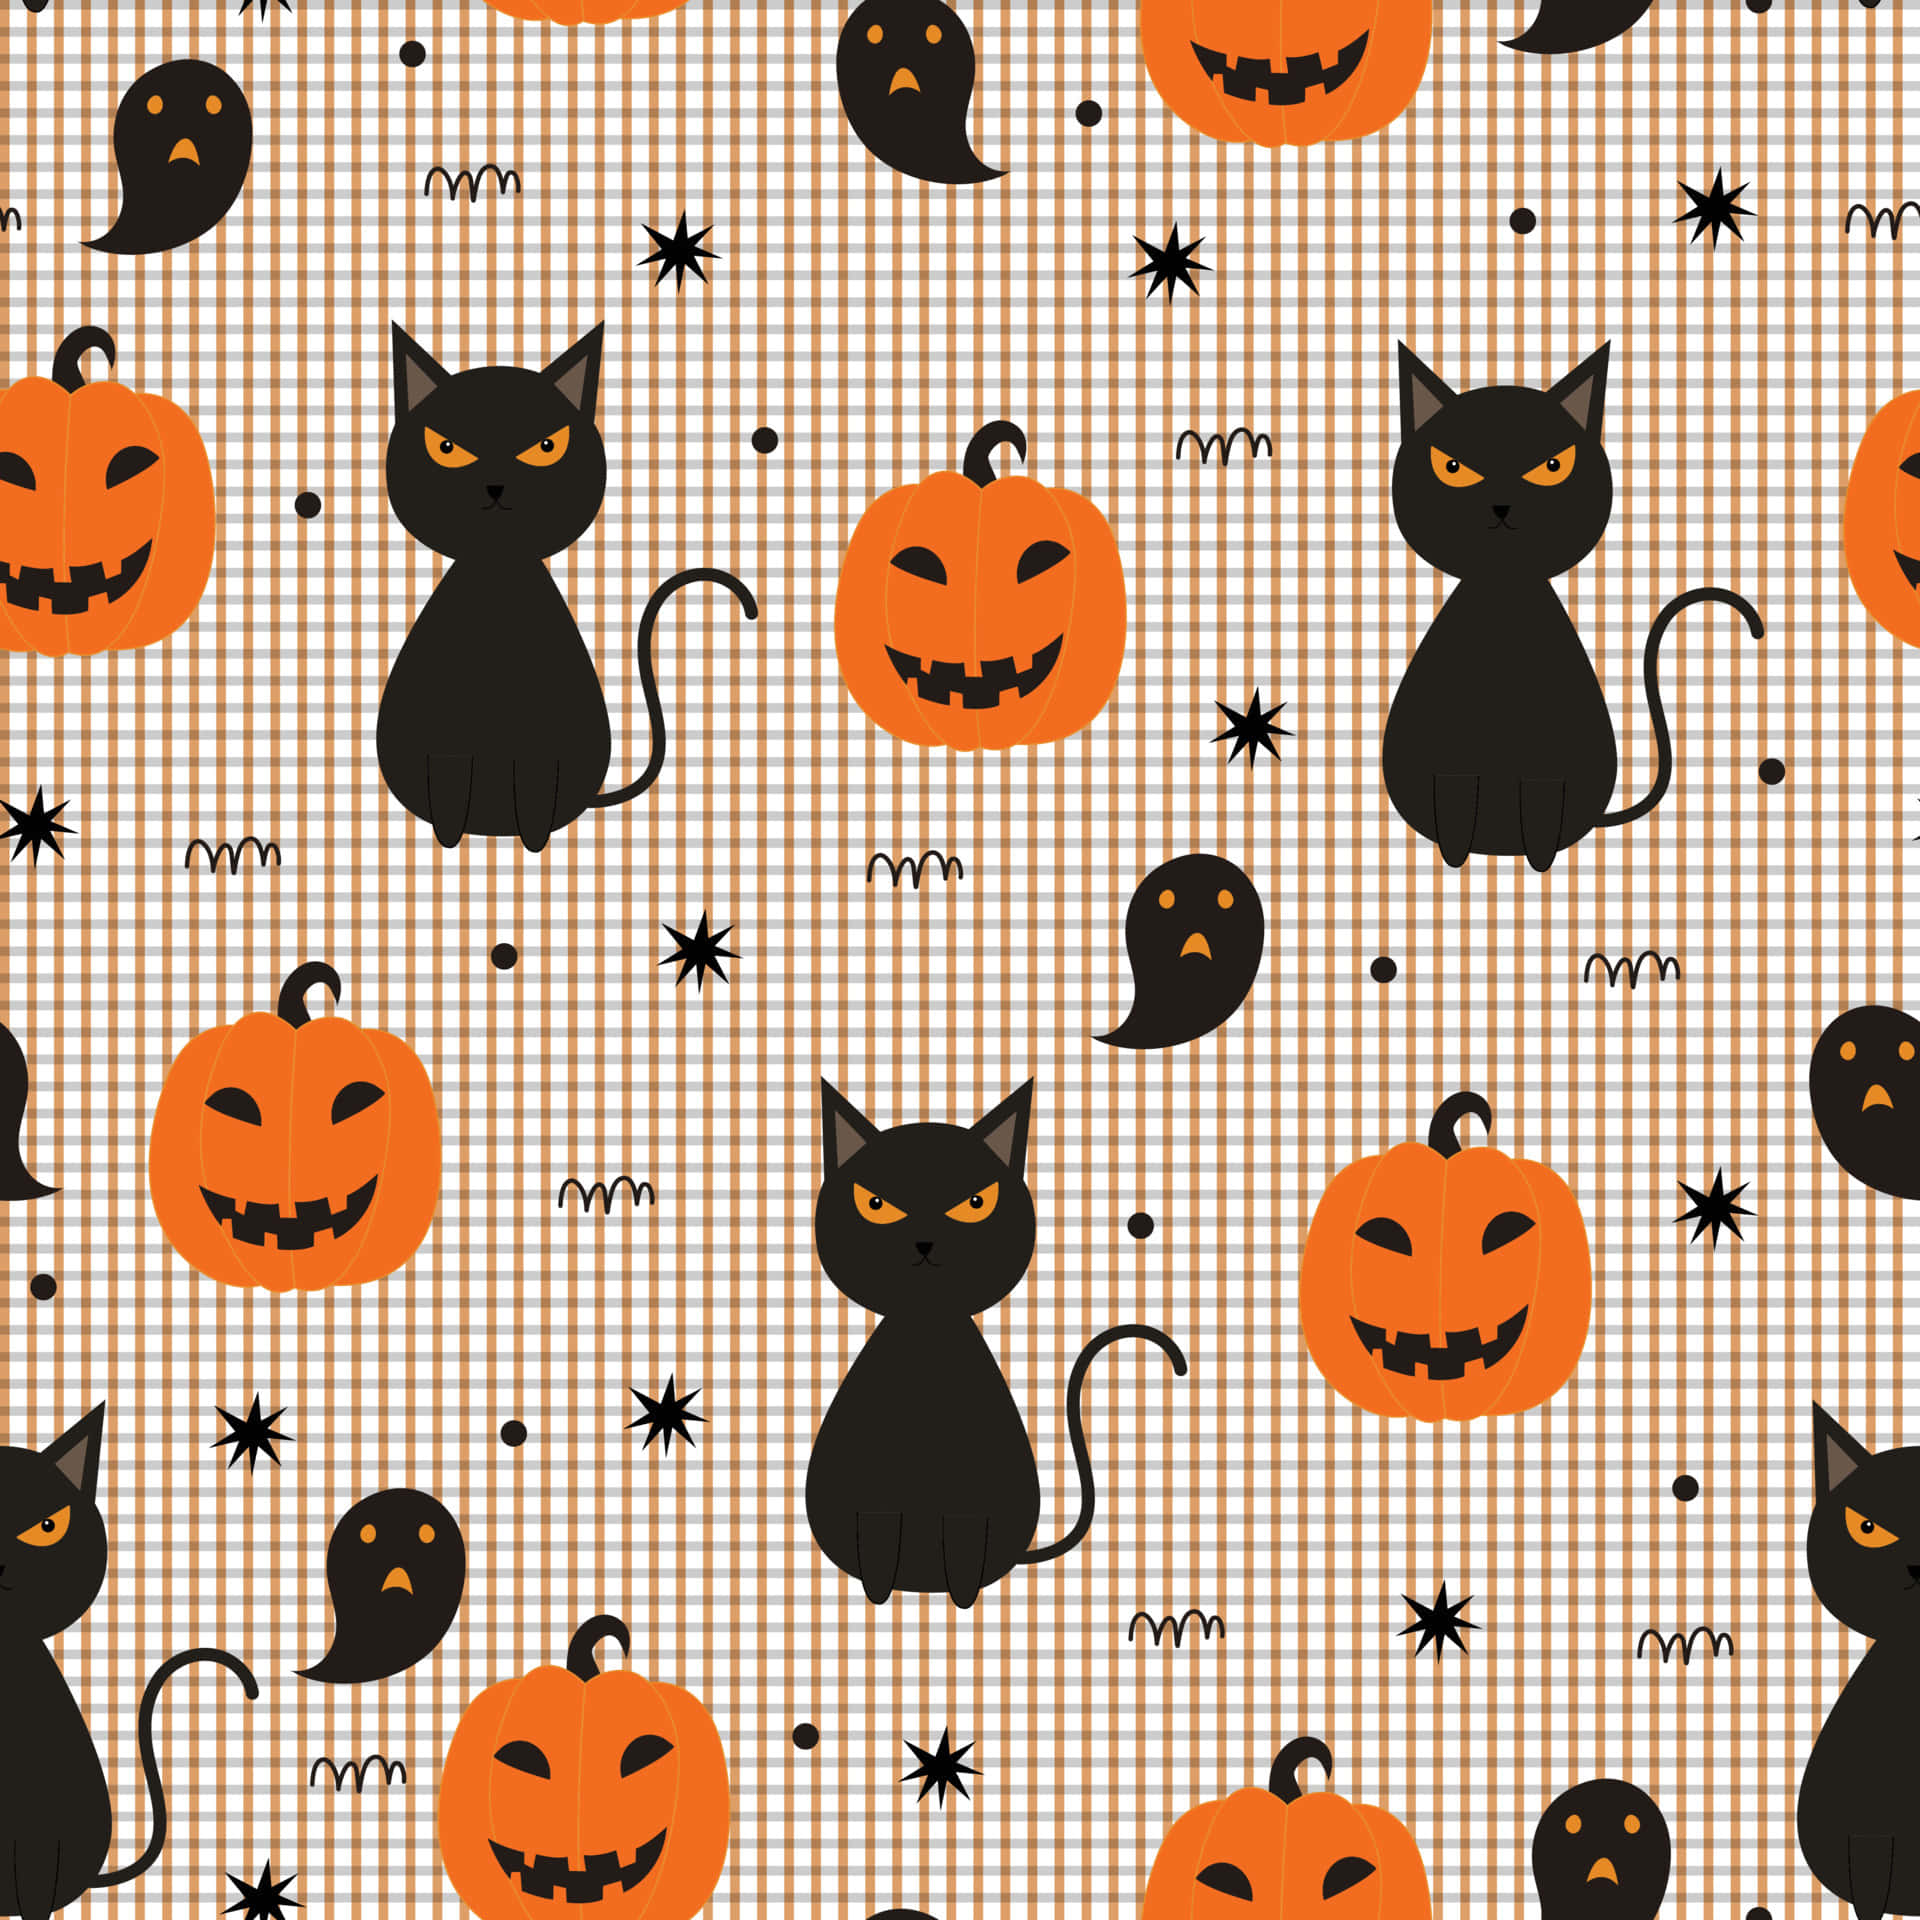 Scaredy Cat gets an eerie makeover this Halloween ! Wallpaper